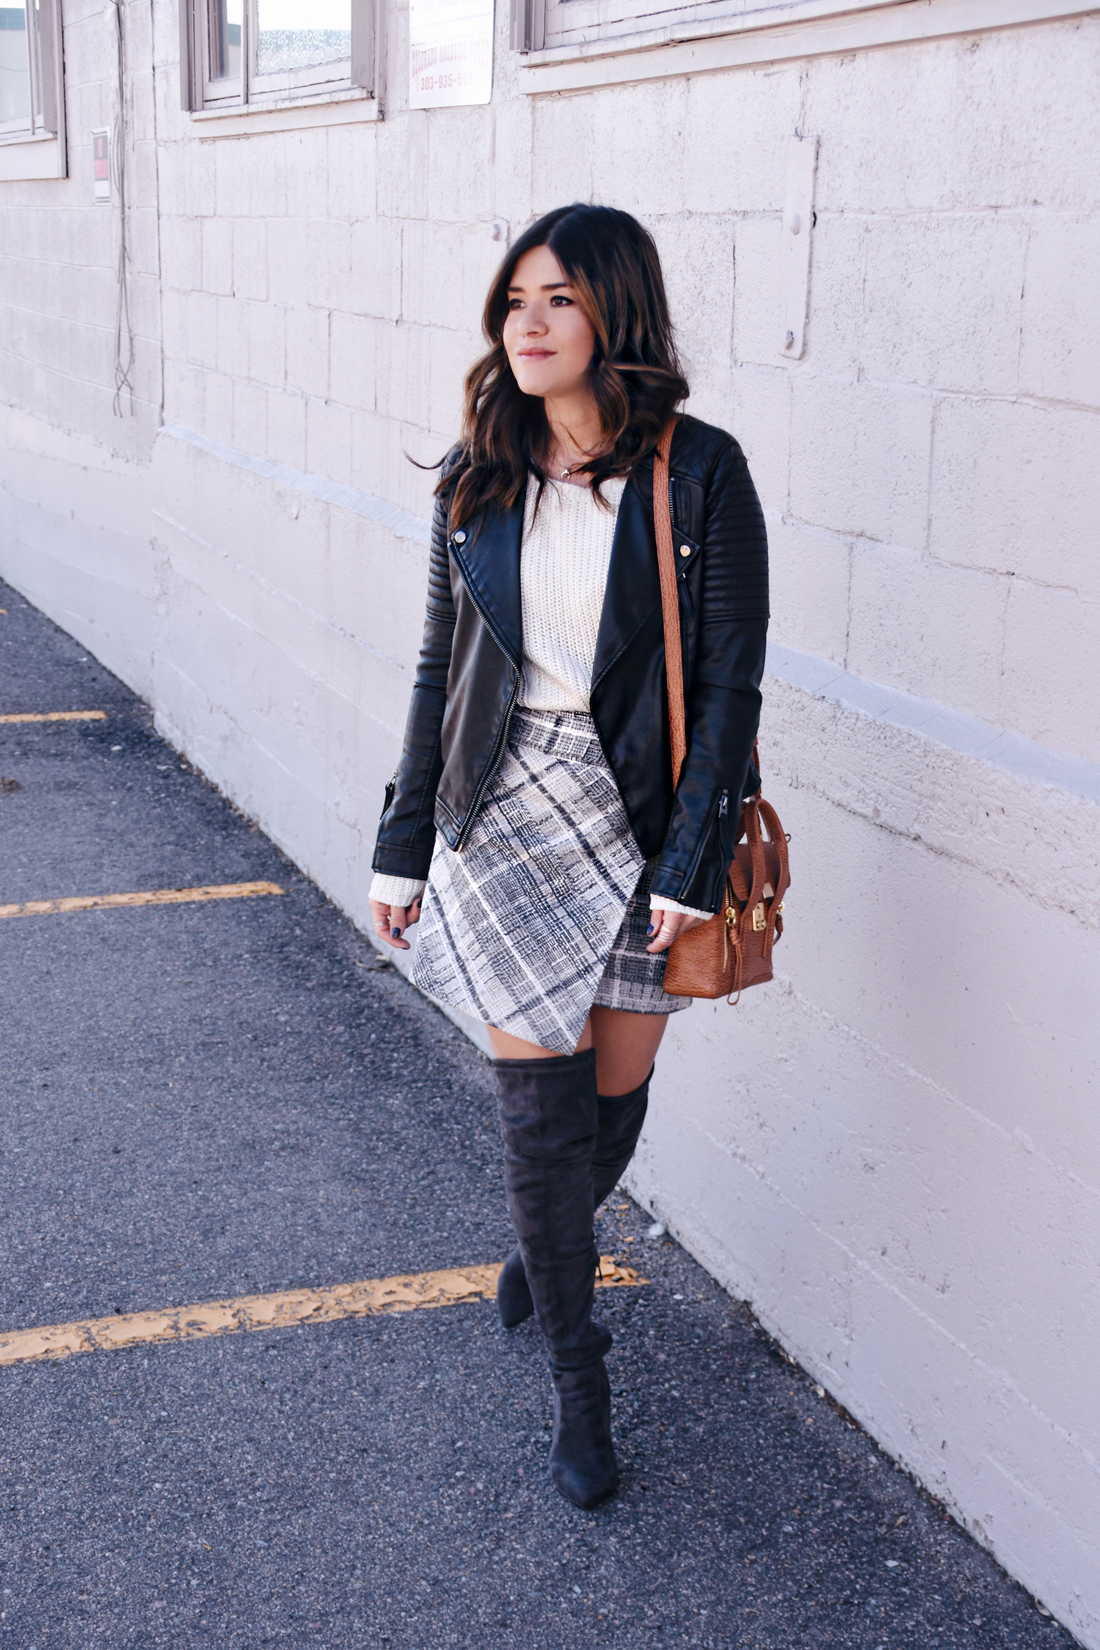 Carolina Hellal of Chic Talk wearing a Chicwish camel coat, plaid skirt, Topshop faux leather jacket, and Public Desire over the knee boots